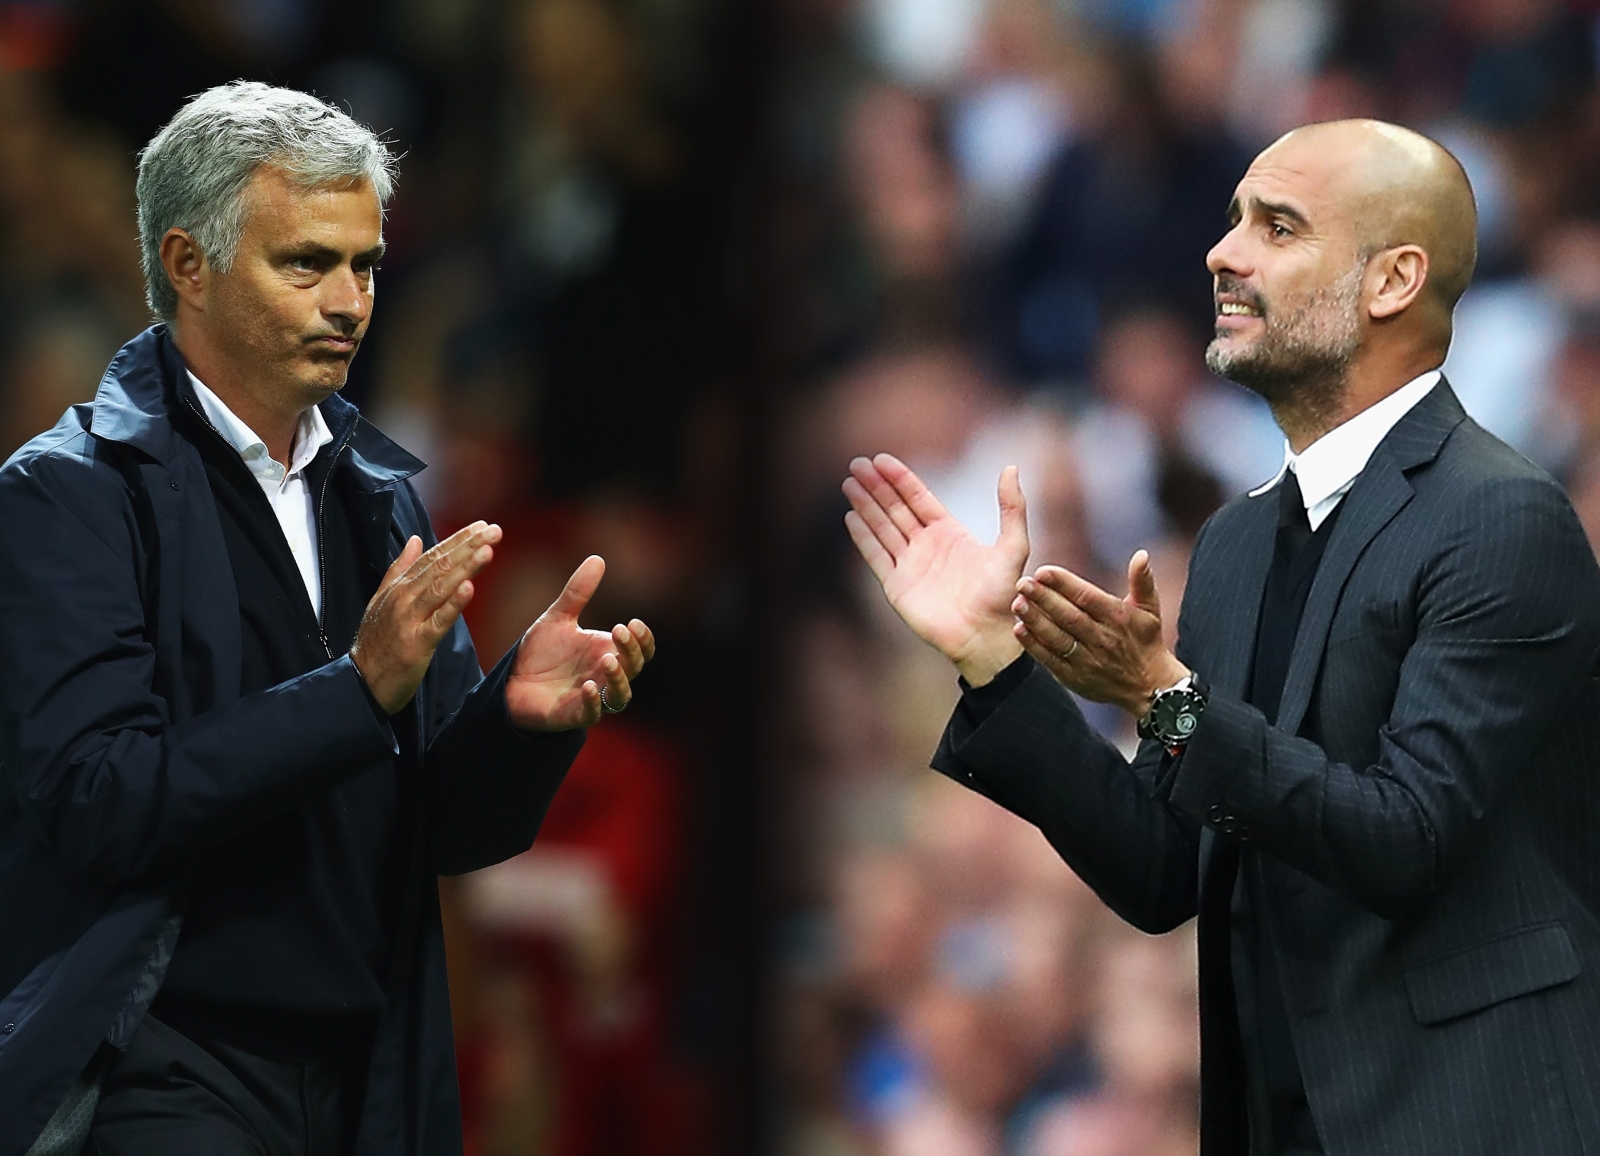 Jose Mourinho vs Pep Guardiola: A modern rivalry has arrived in Manchester